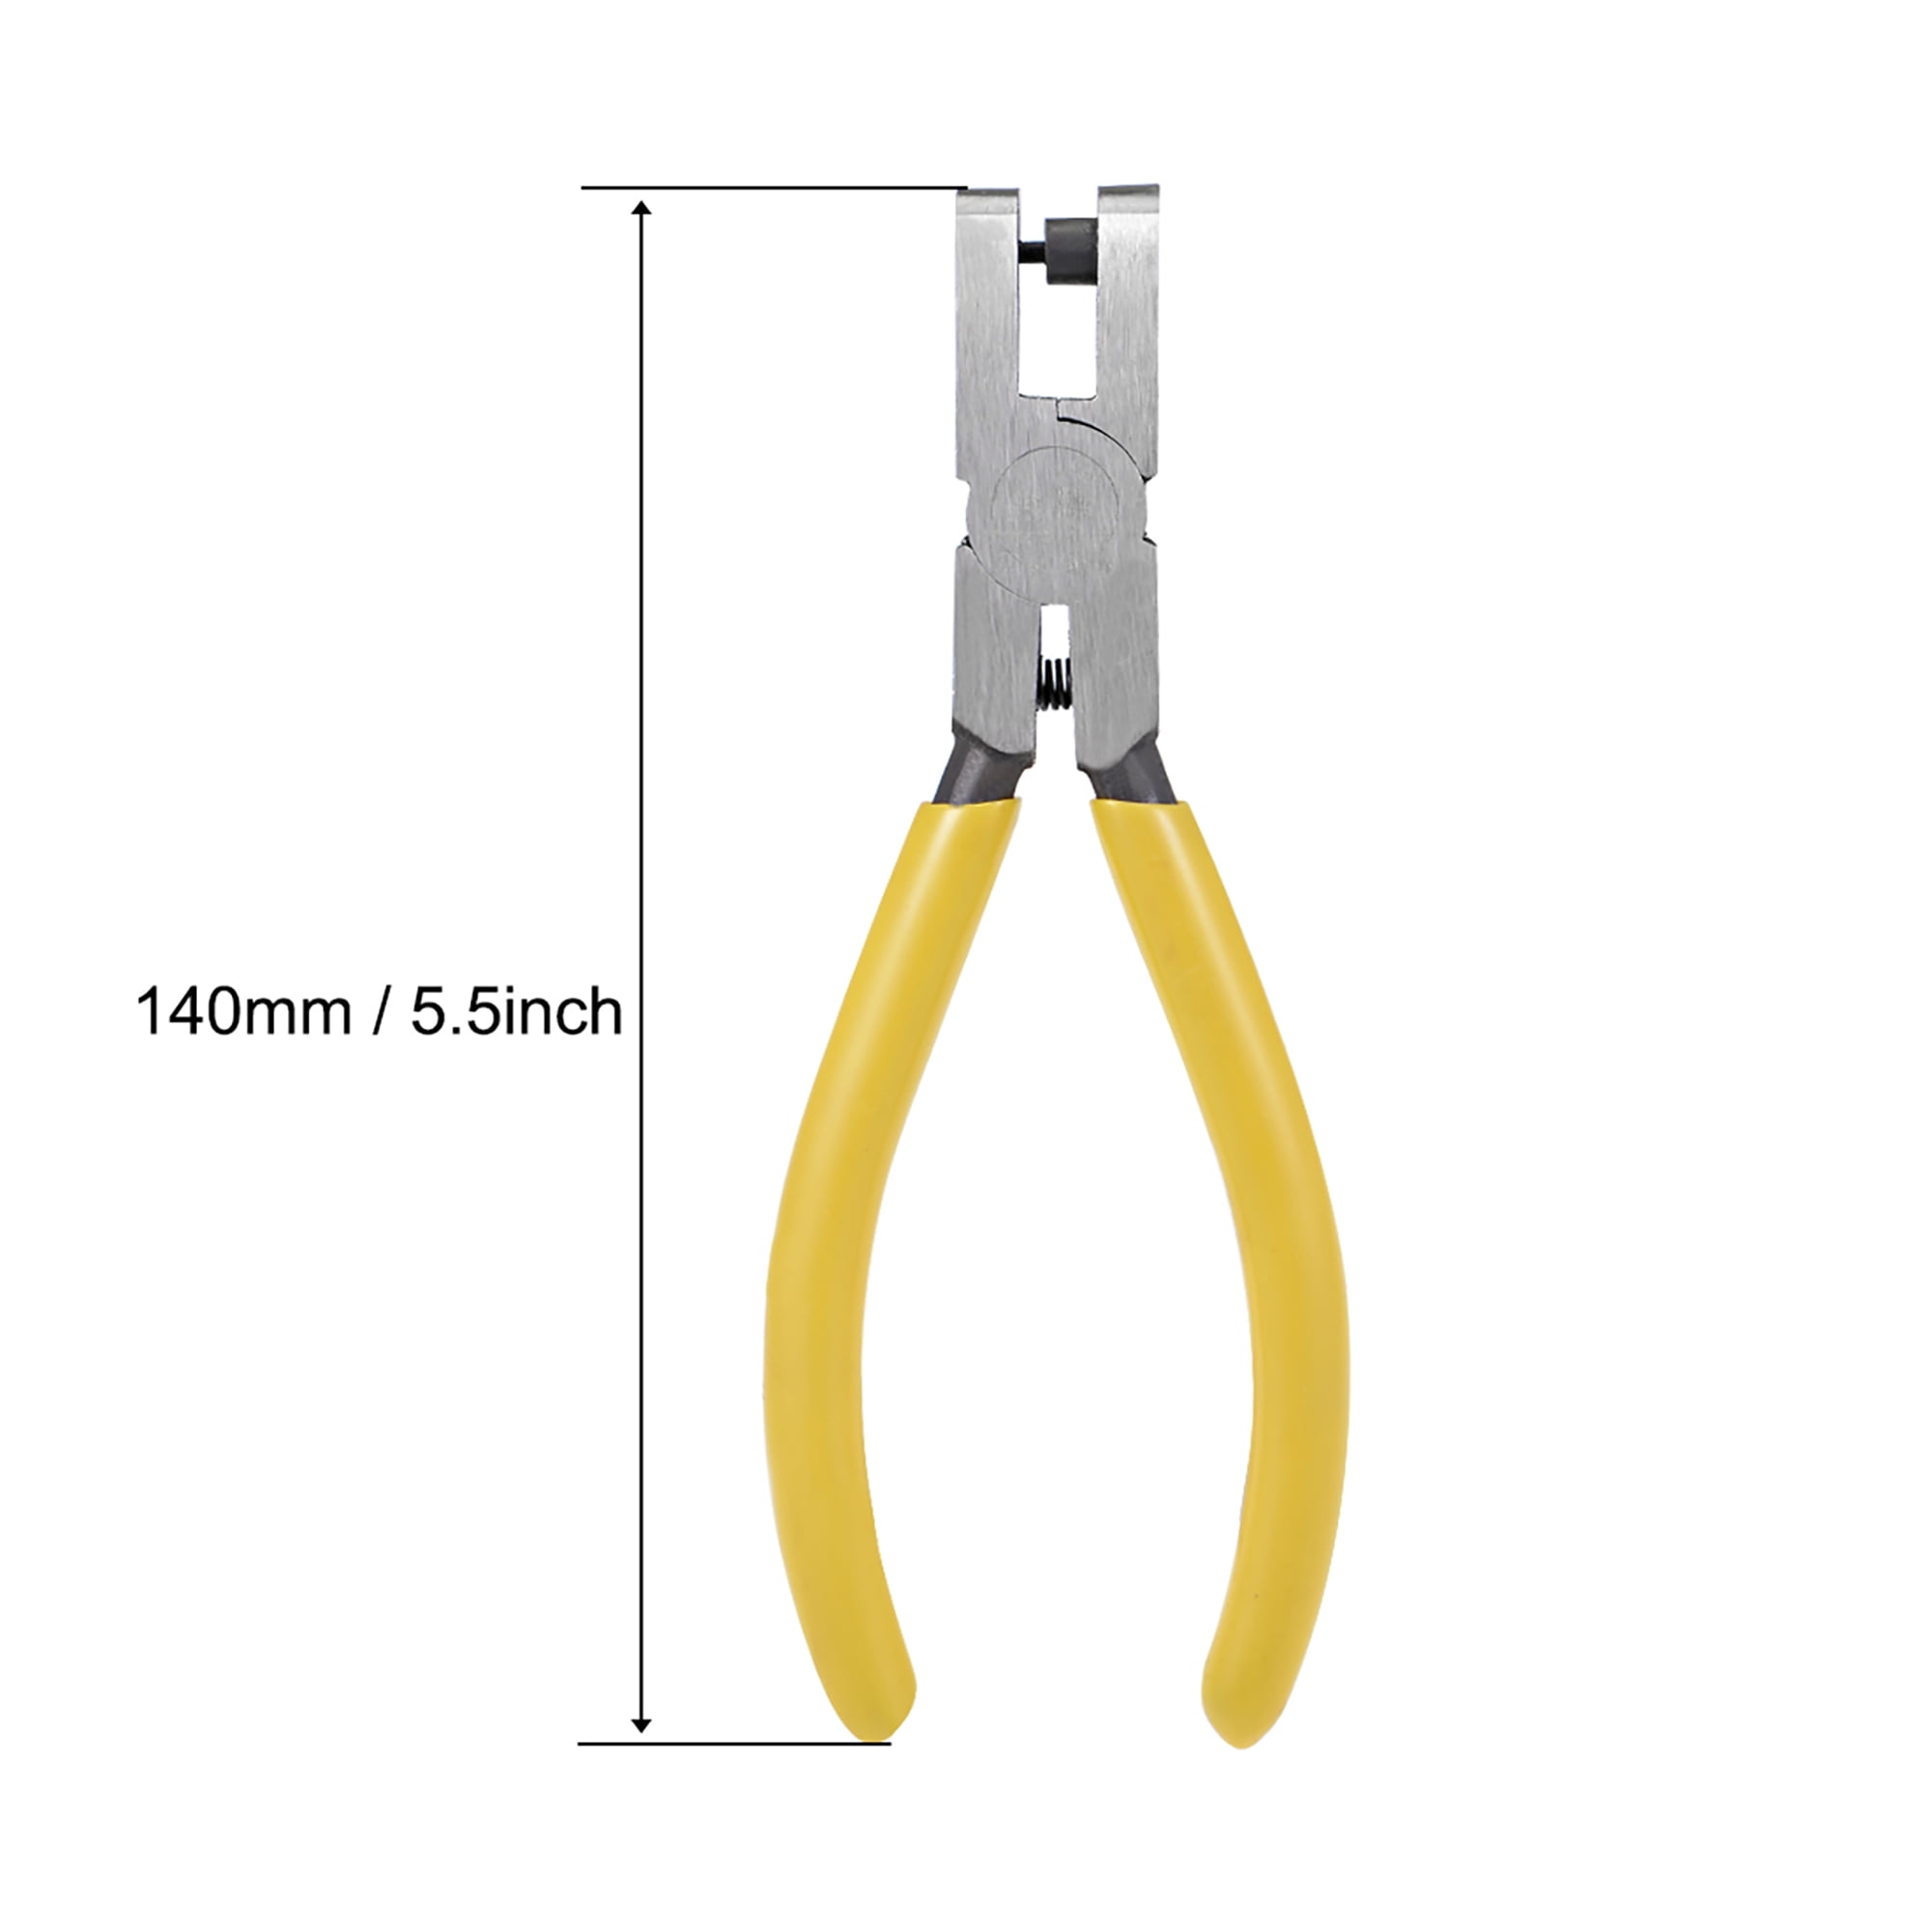 Kemcatui 2mm Round Hole Punch Pliers, Carbon Steel Puncher Pliers Repair  Tools, Belt Hole Puncher Small Hole Puncher for Belts, Shoes,Craft  Projects